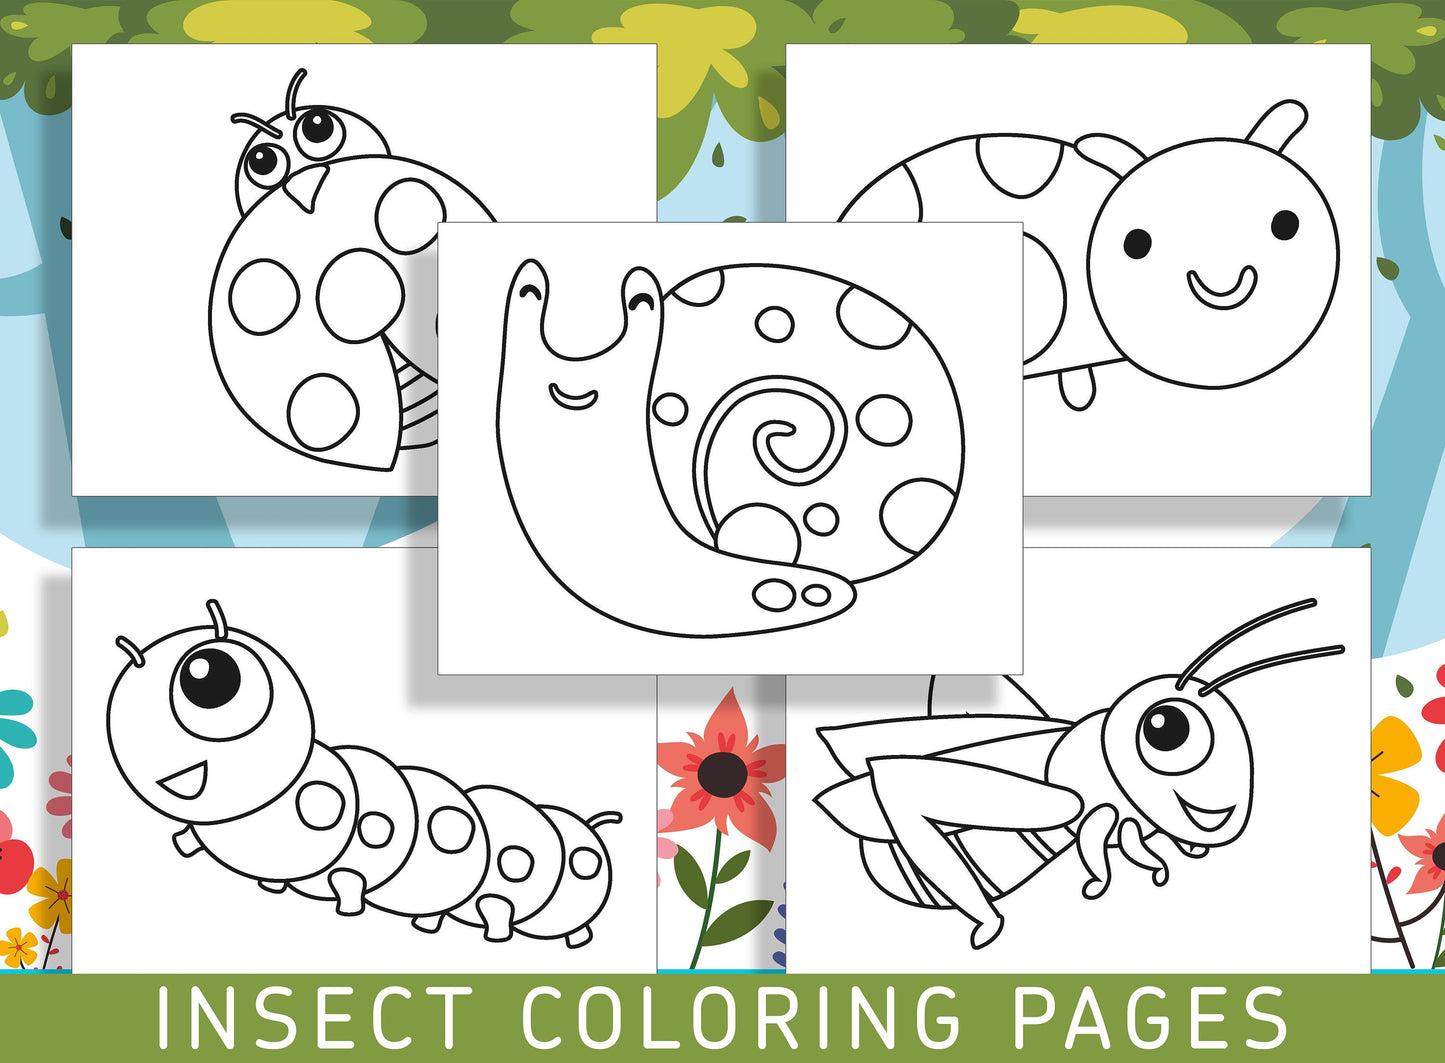 Buzz into Fun with 25 Insect Coloring Pages - Perfect for Kindergarten and Preschool! - PDF File, Instant Download